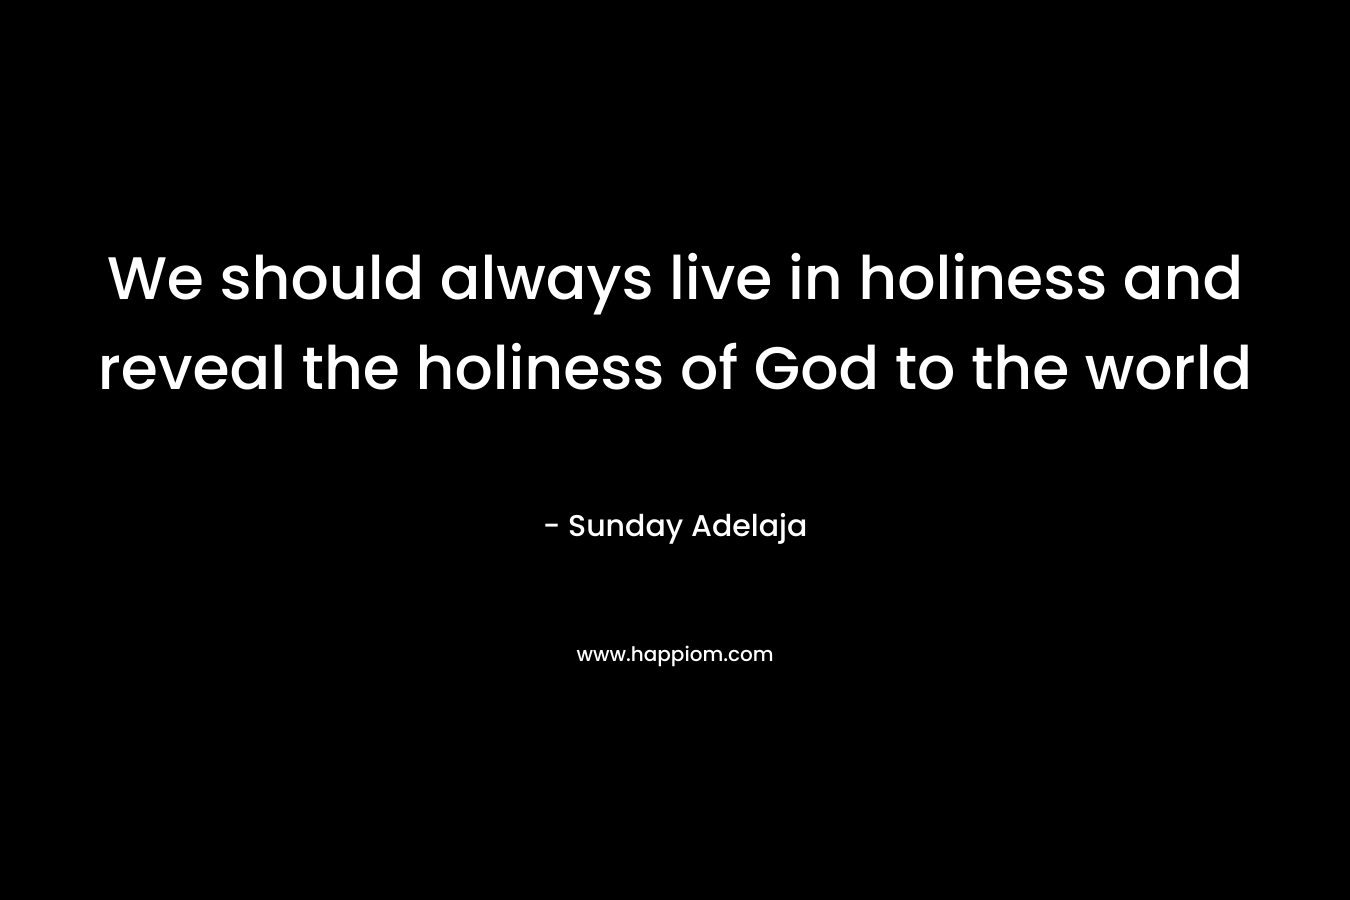 We should always live in holiness and reveal the holiness of God to the world